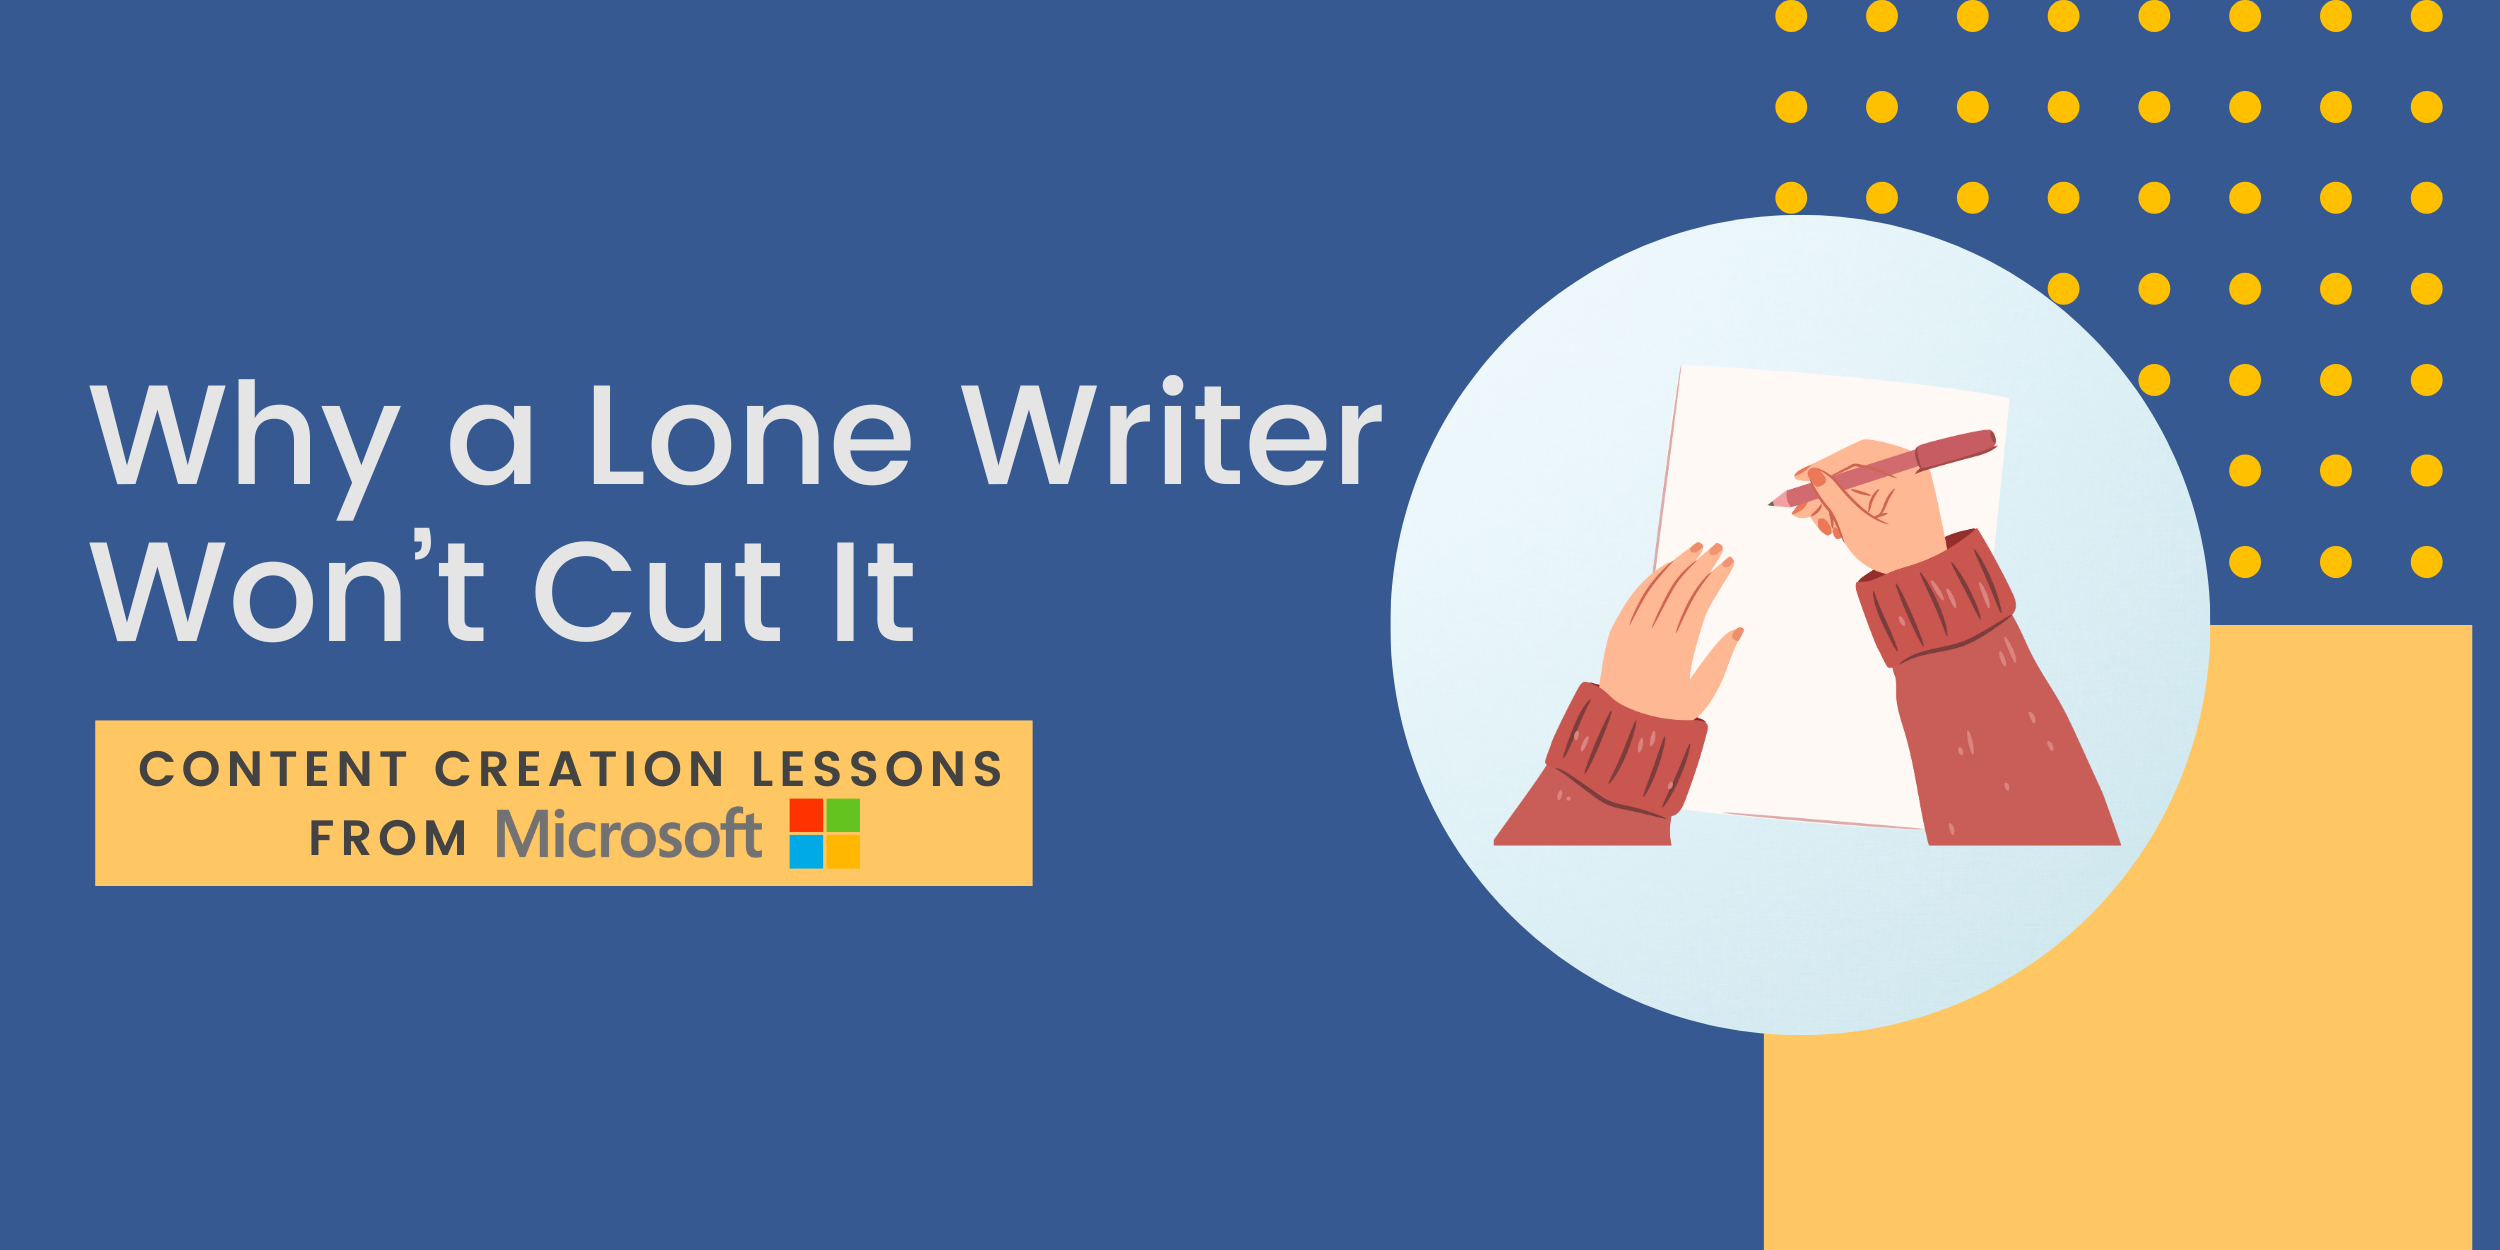 Why a Lone Writer Won’t Cut It: Content Creation Lessons from Microsoft